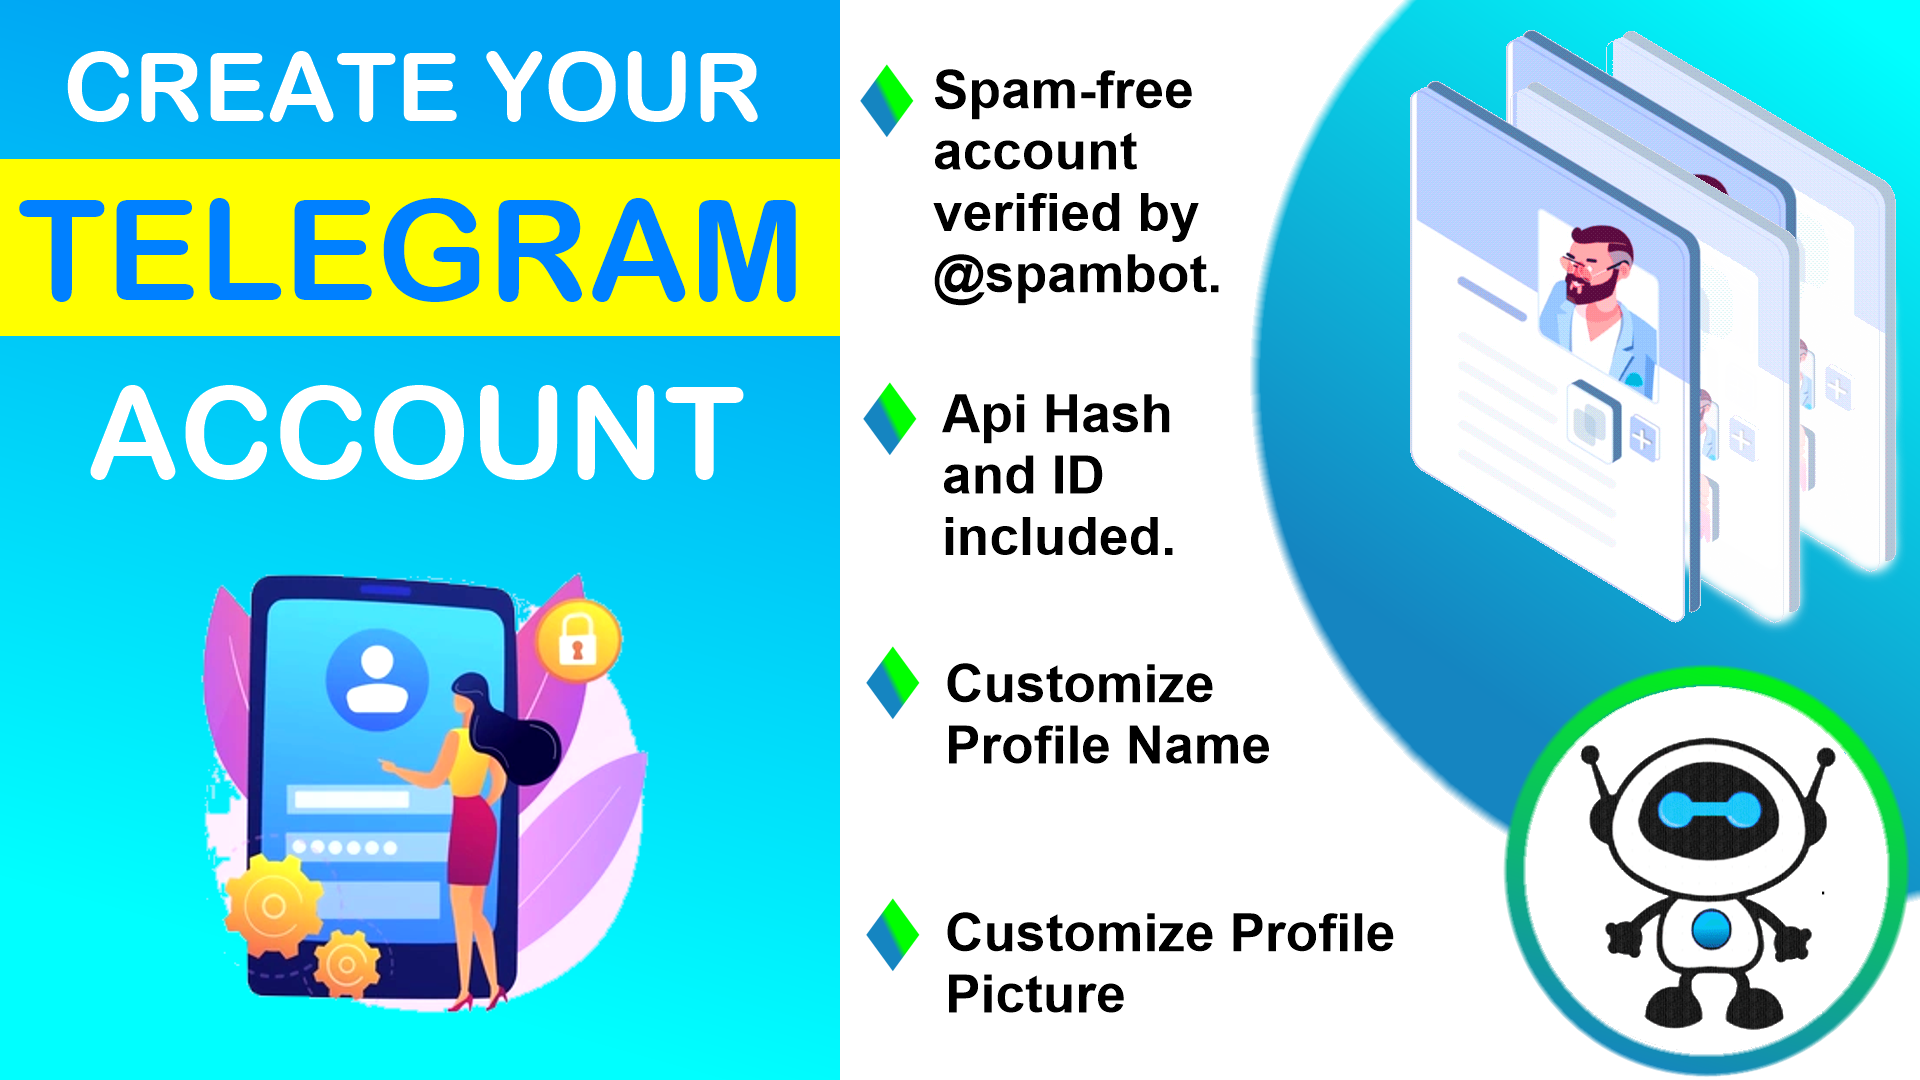 Get 10 Telegram Account with API Hash and Id for promo